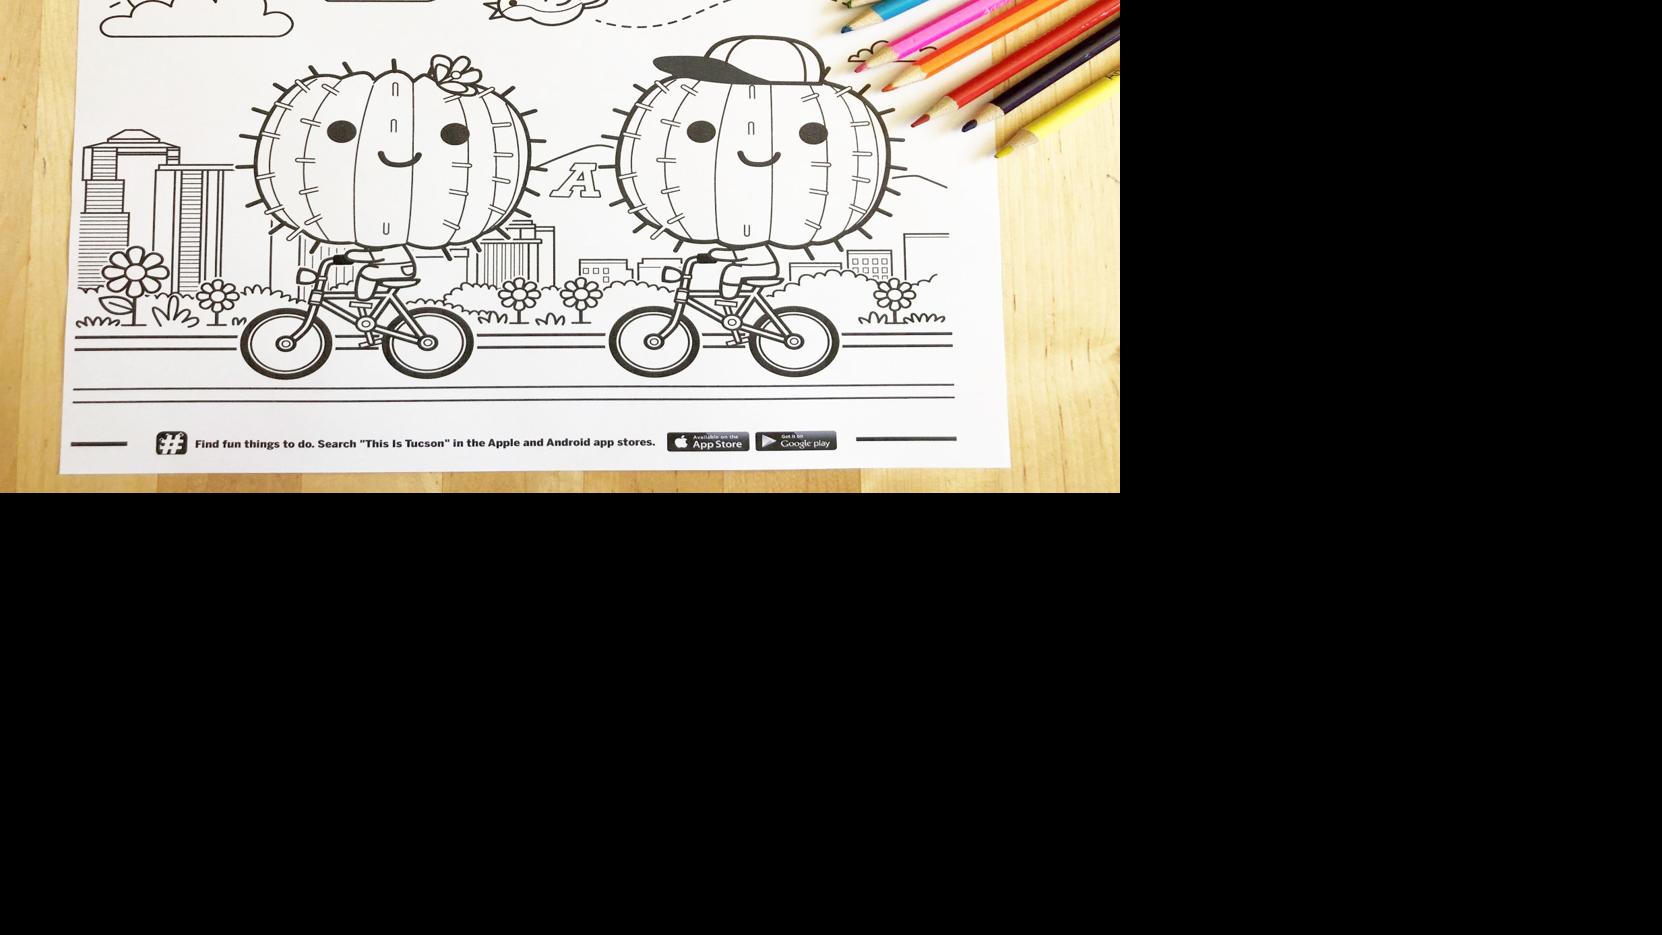 Printable Coloring Pages for Kids - Simple Fun for Kids VIP